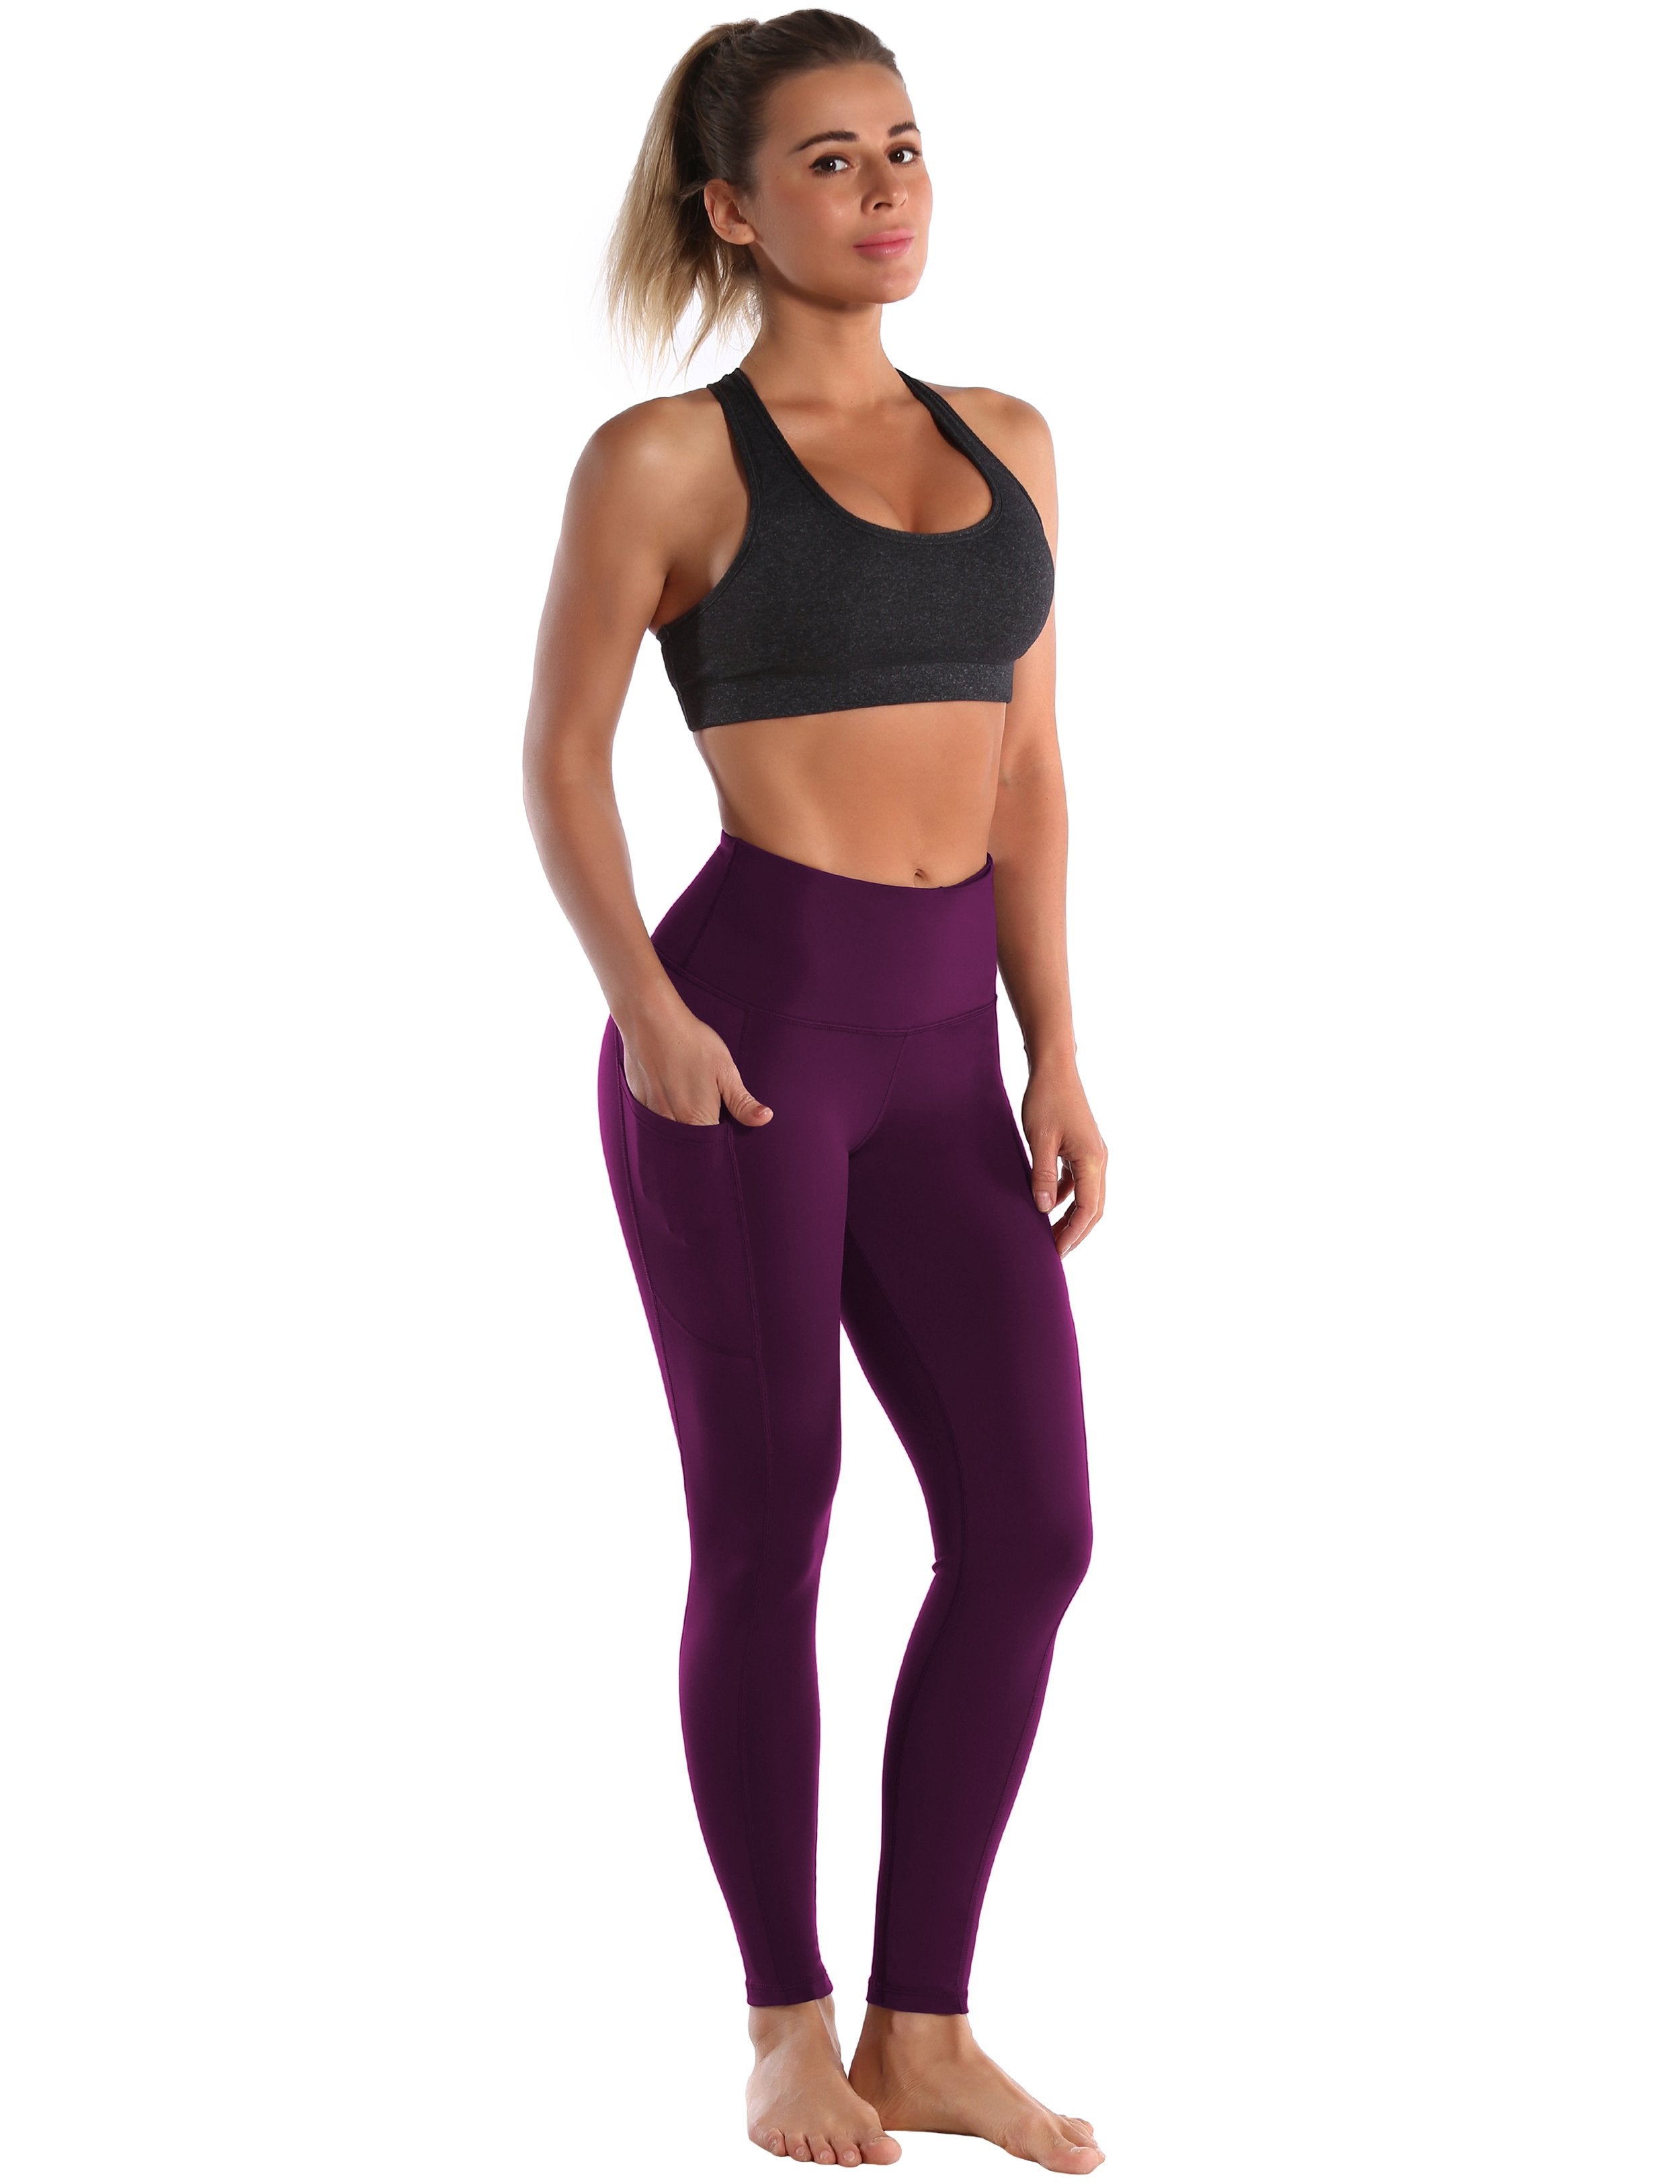 Hip Line Side Pockets Golf Pants grapevine Sexy Hip Line Side Pockets 75%Nylon/25%Spandex Fabric doesn't attract lint easily 4-way stretch No see-through Moisture-wicking Tummy control Inner pocket Two lengths